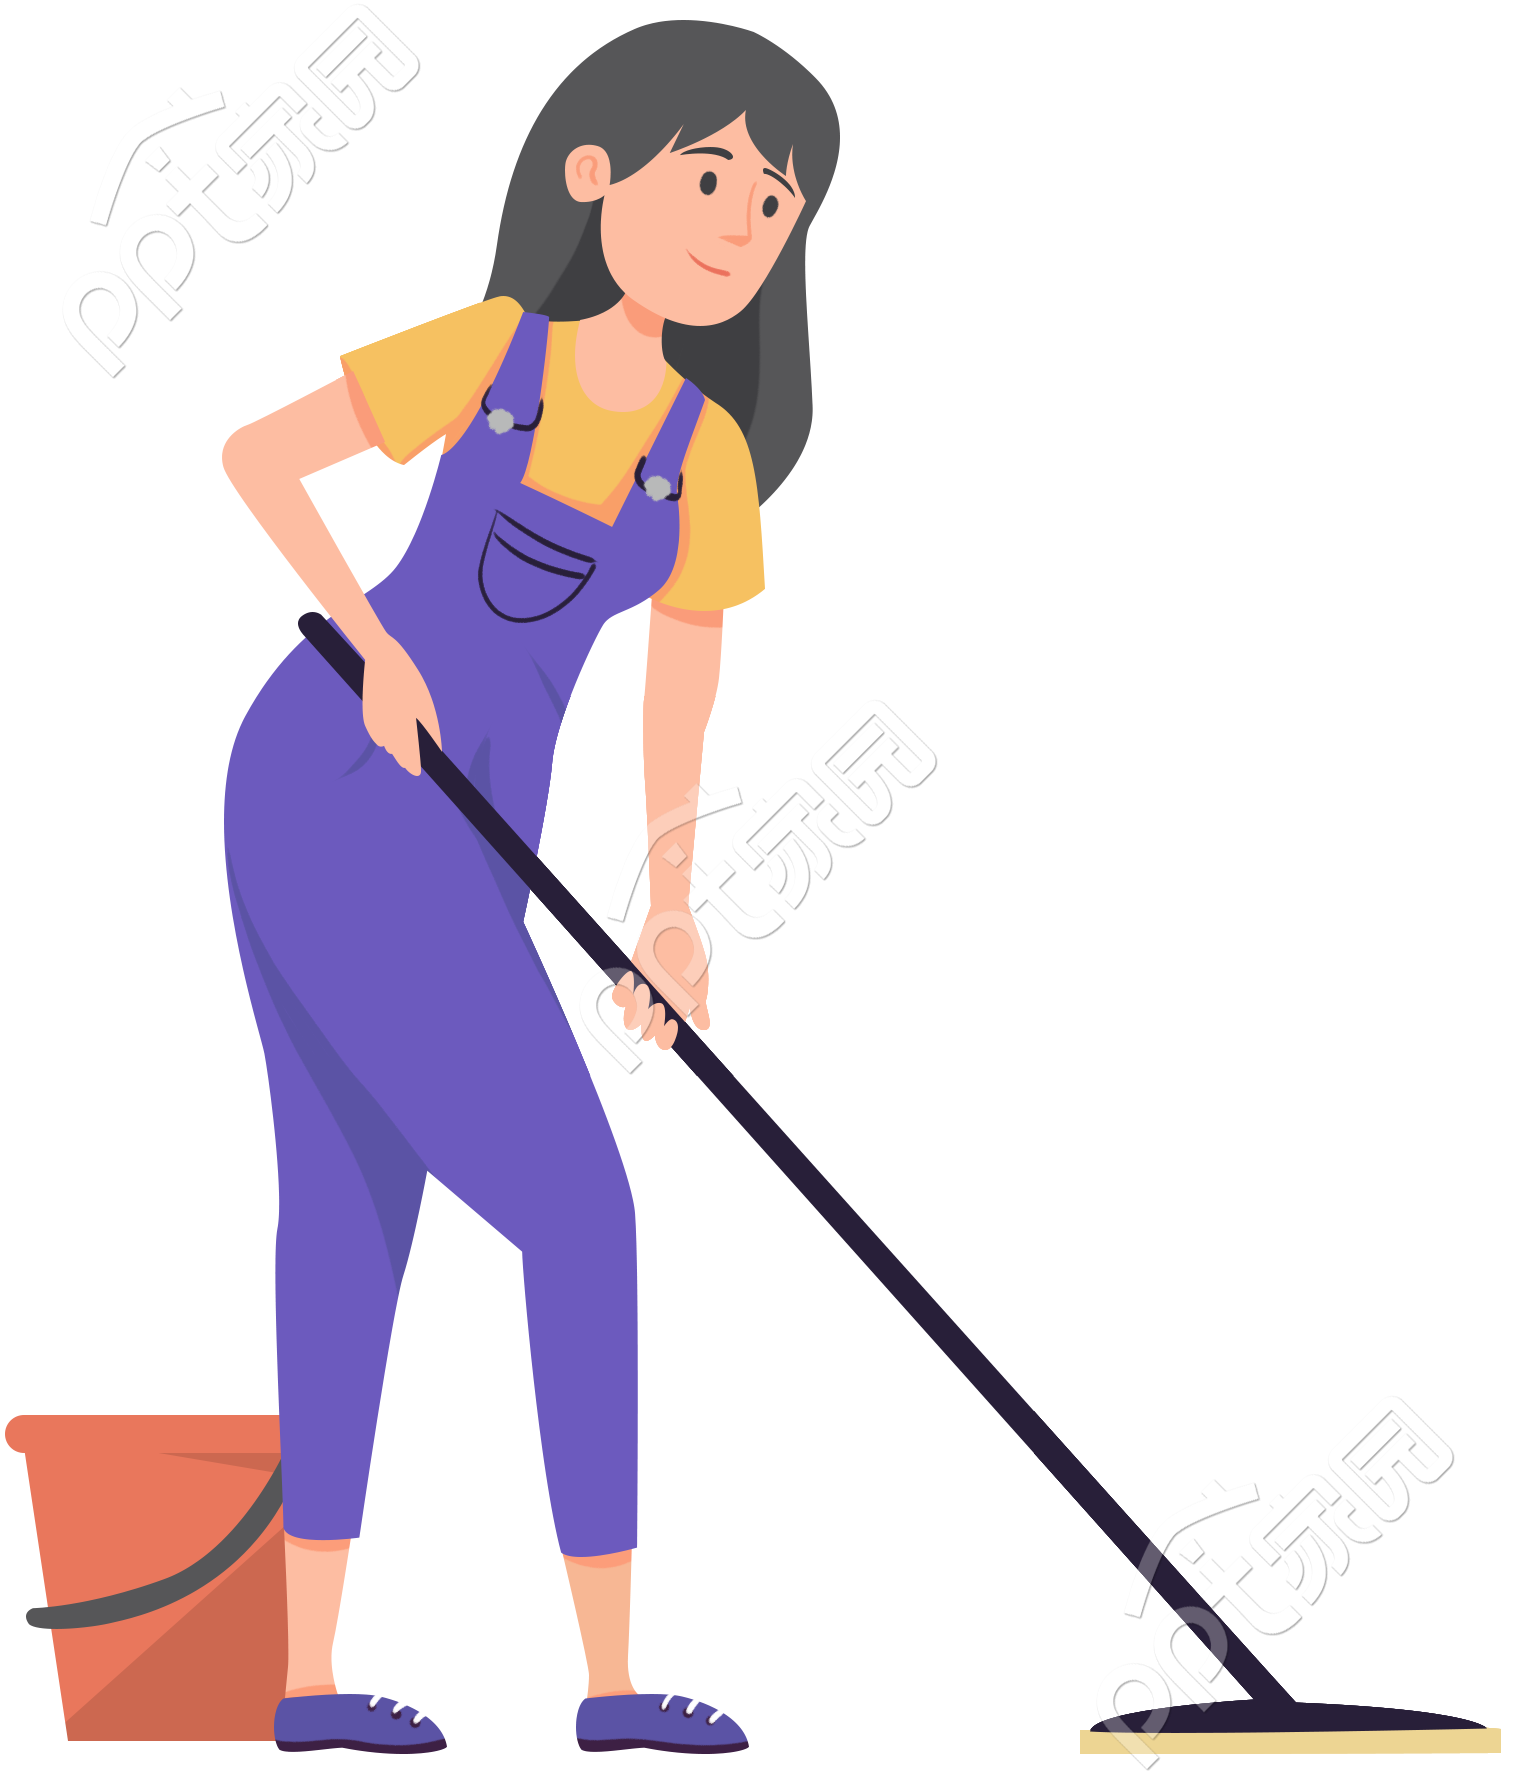 Cleaning illustration image_picture free download 400097856_lovepik.com